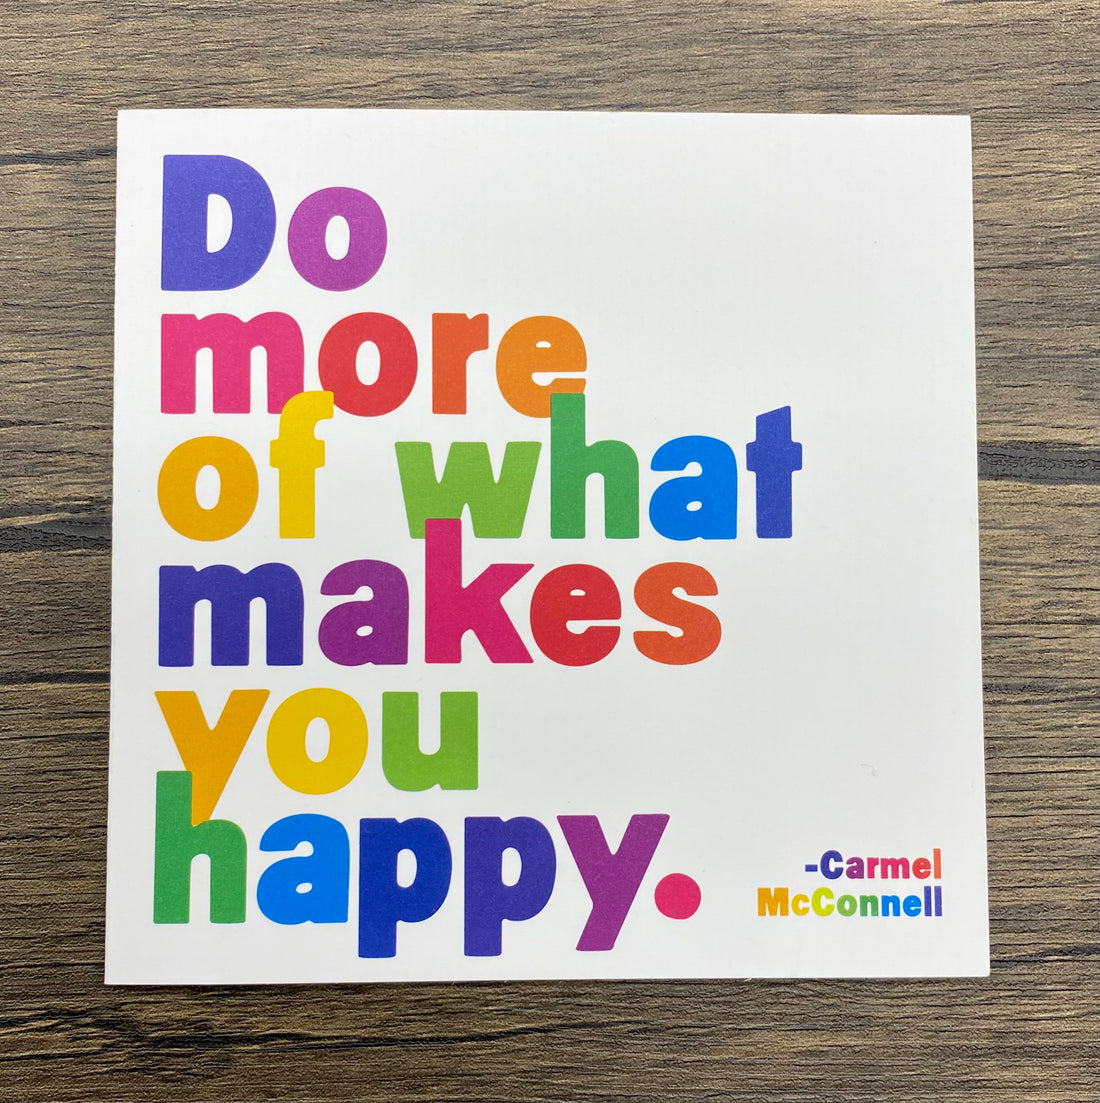 Quotable Card: Do more of what makes you happy.